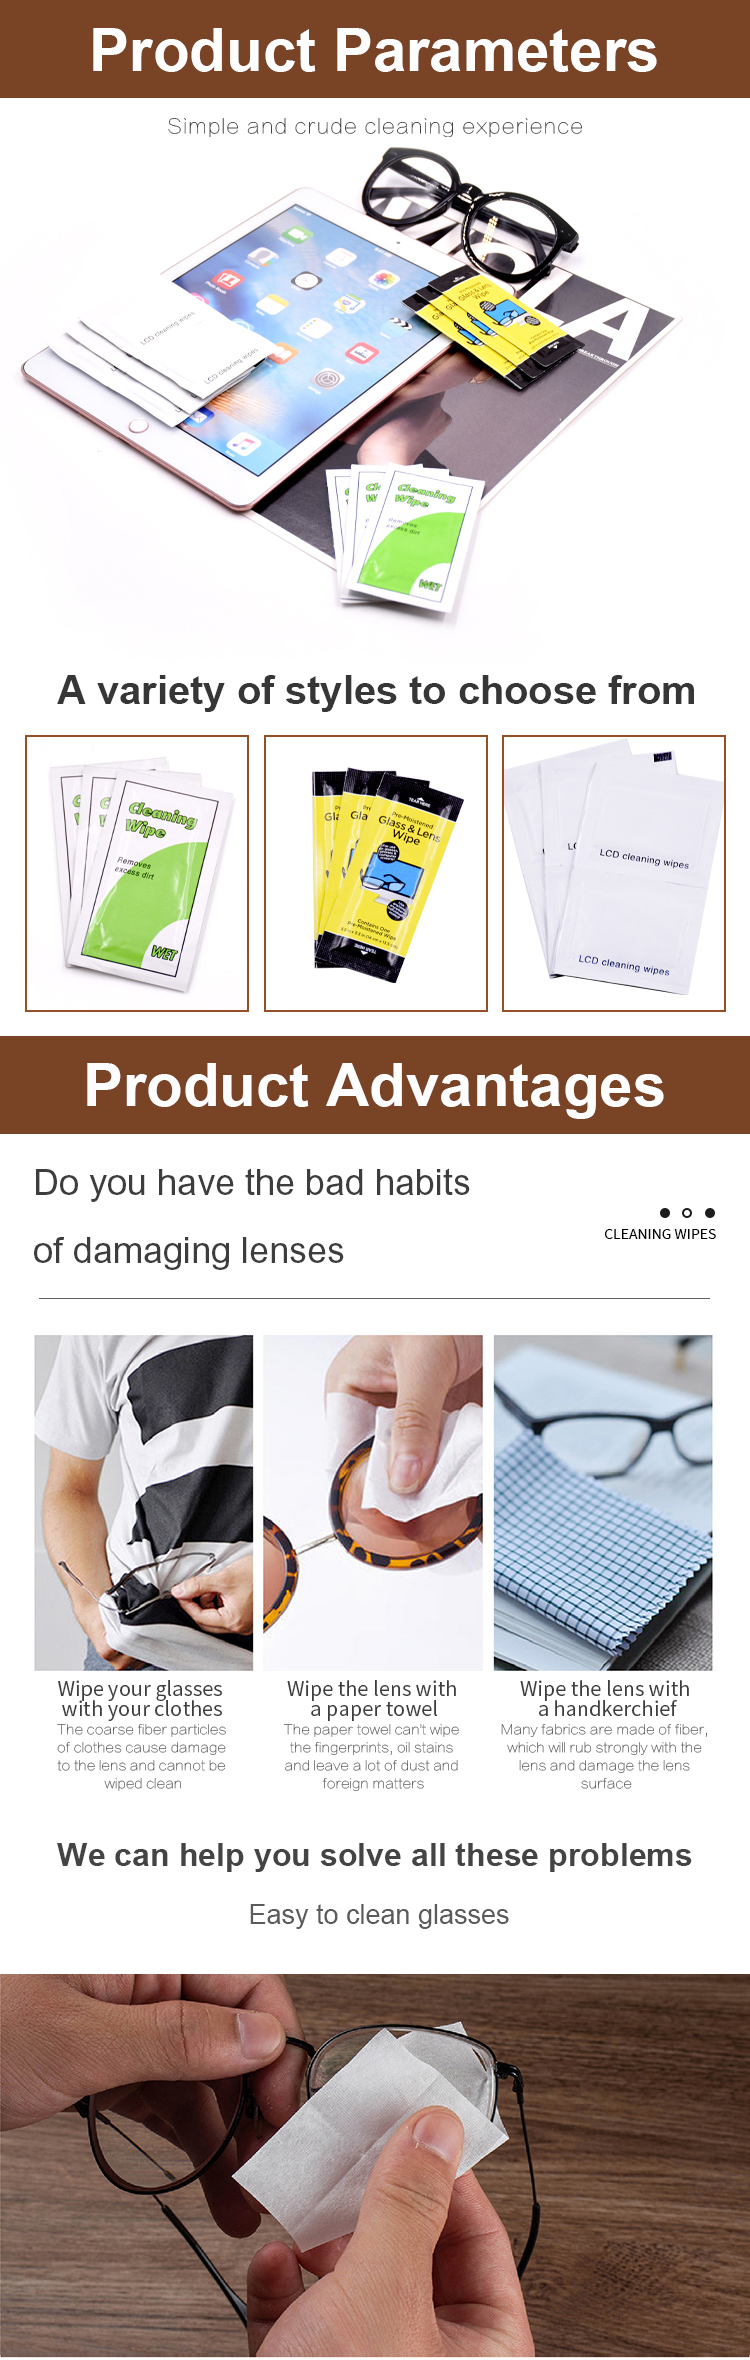 East sunshine Portable Eyeglasses Lens Cleaning Wet tissues glasses clean wipes phone screen clean tissues